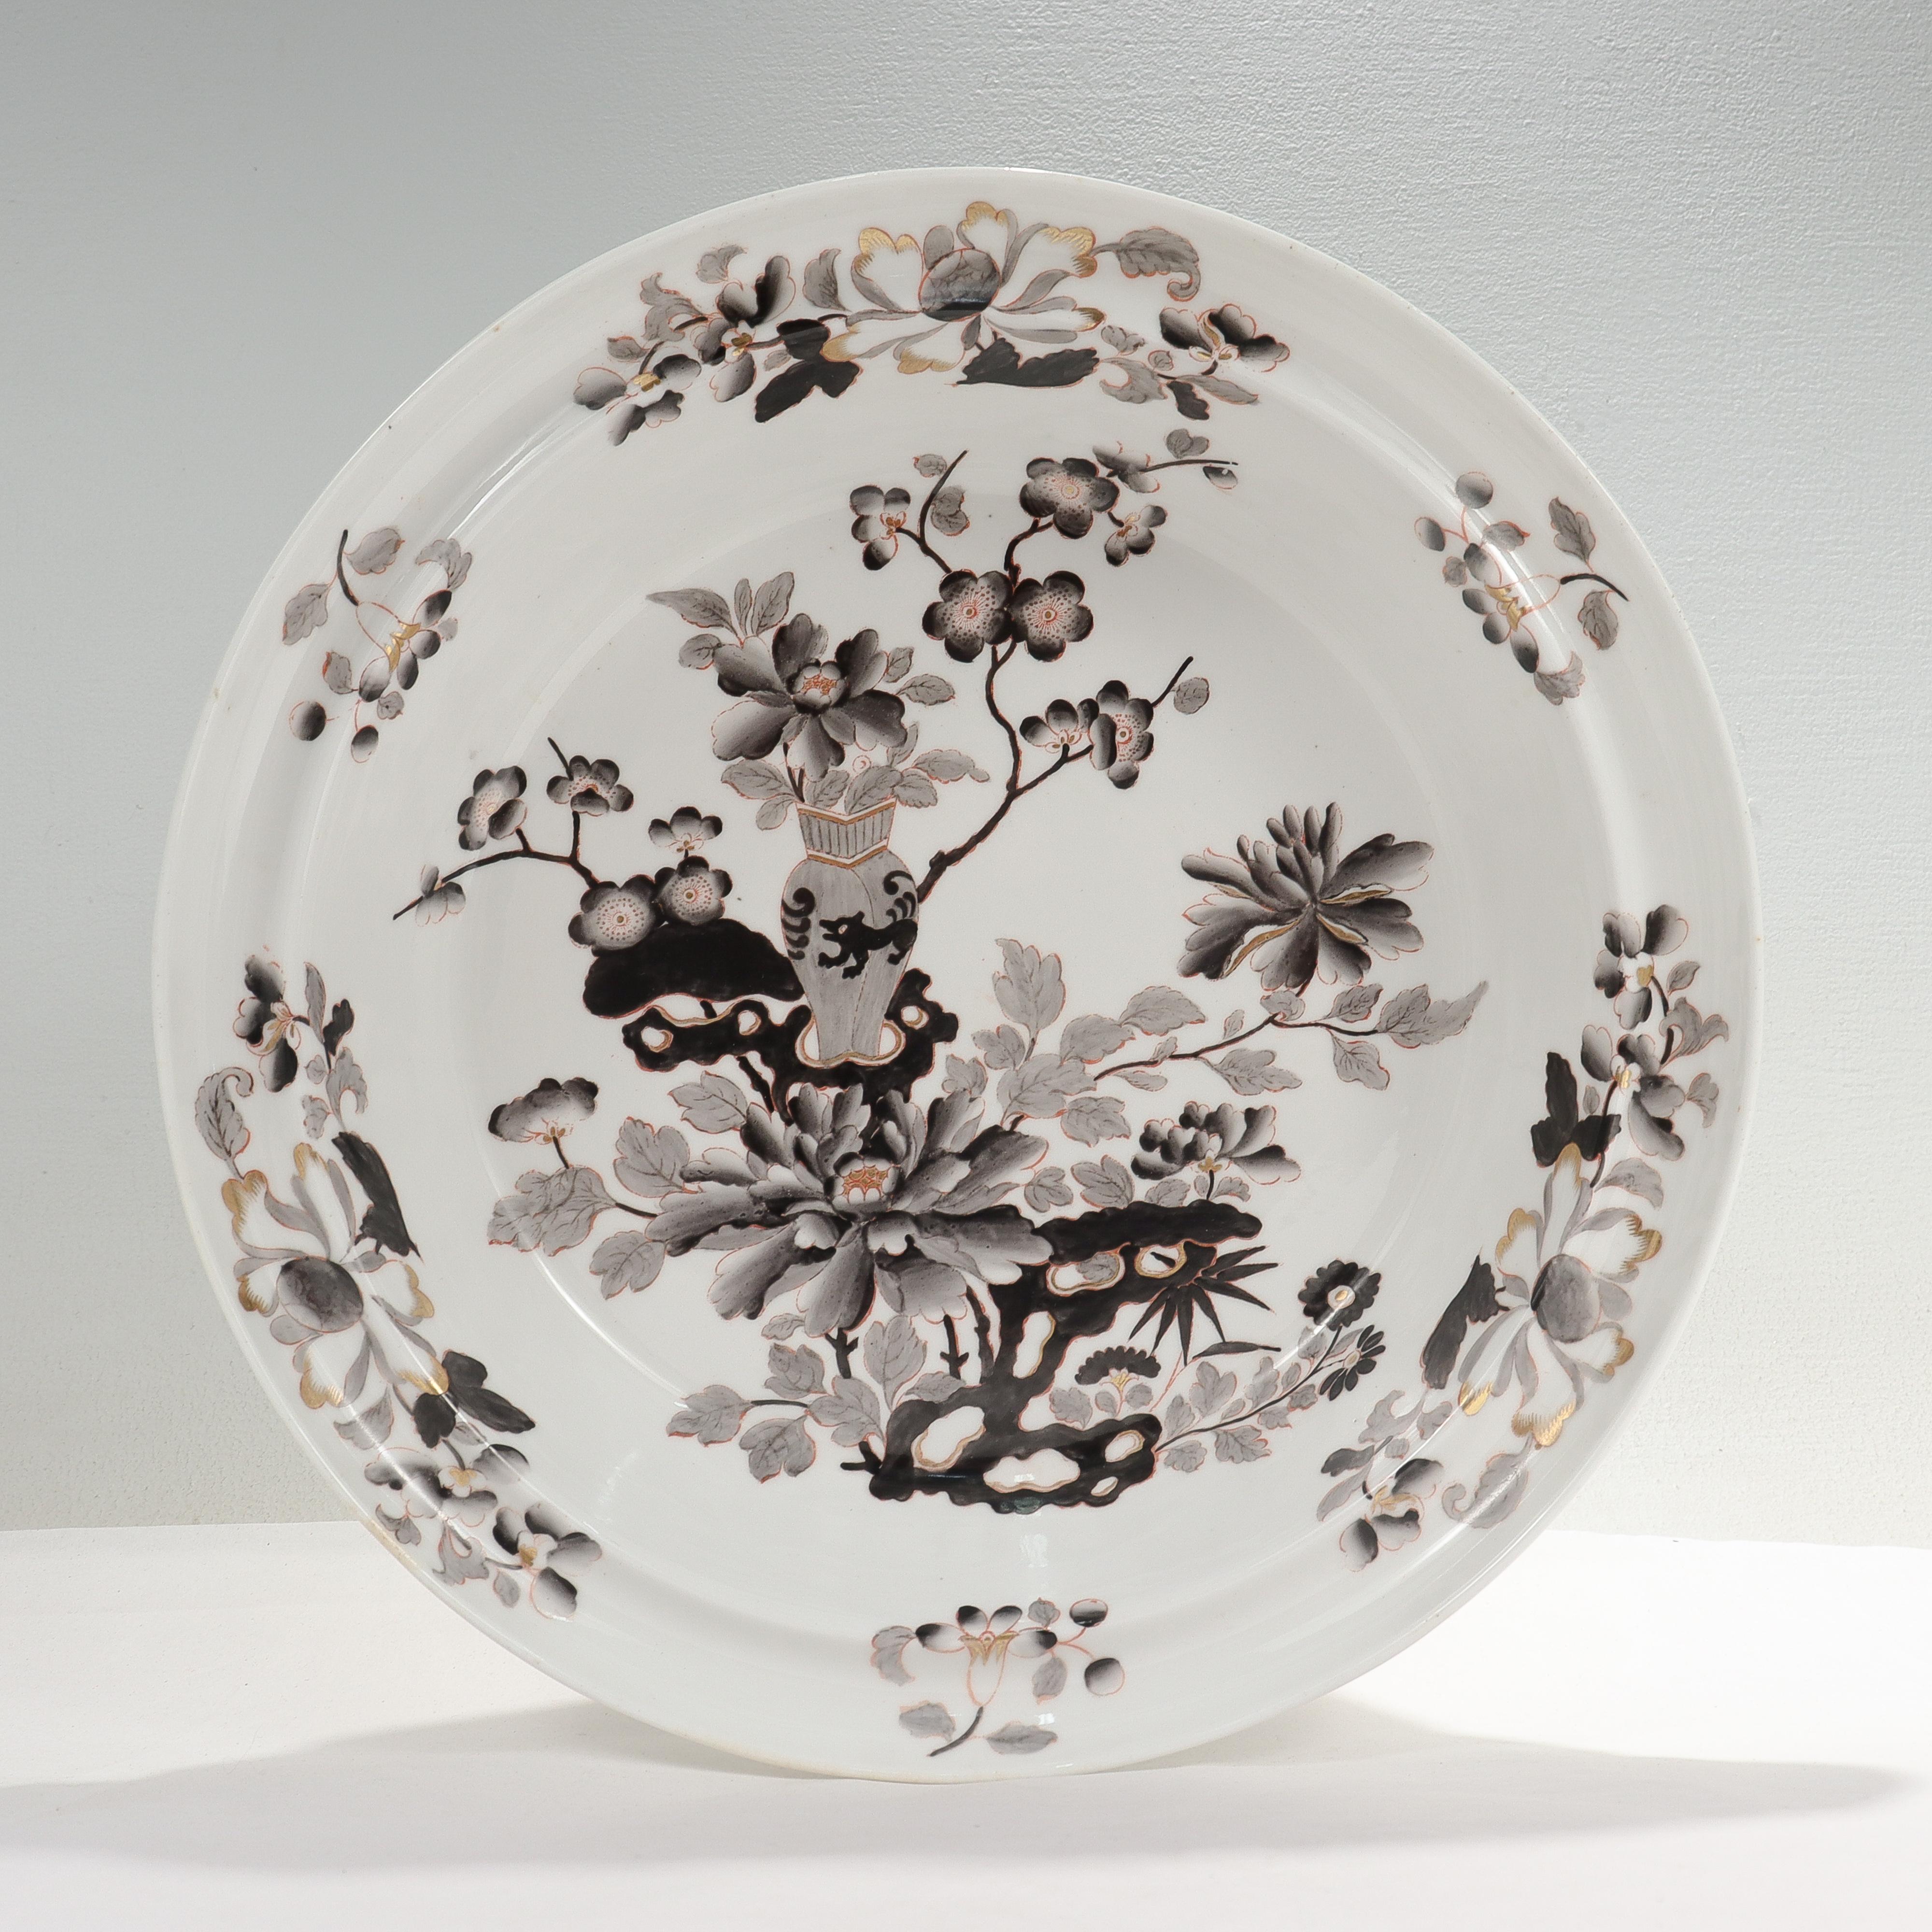 George III Antique 18th Century Worcester Porcelain Black Chinoiserie Bowl or Basin For Sale